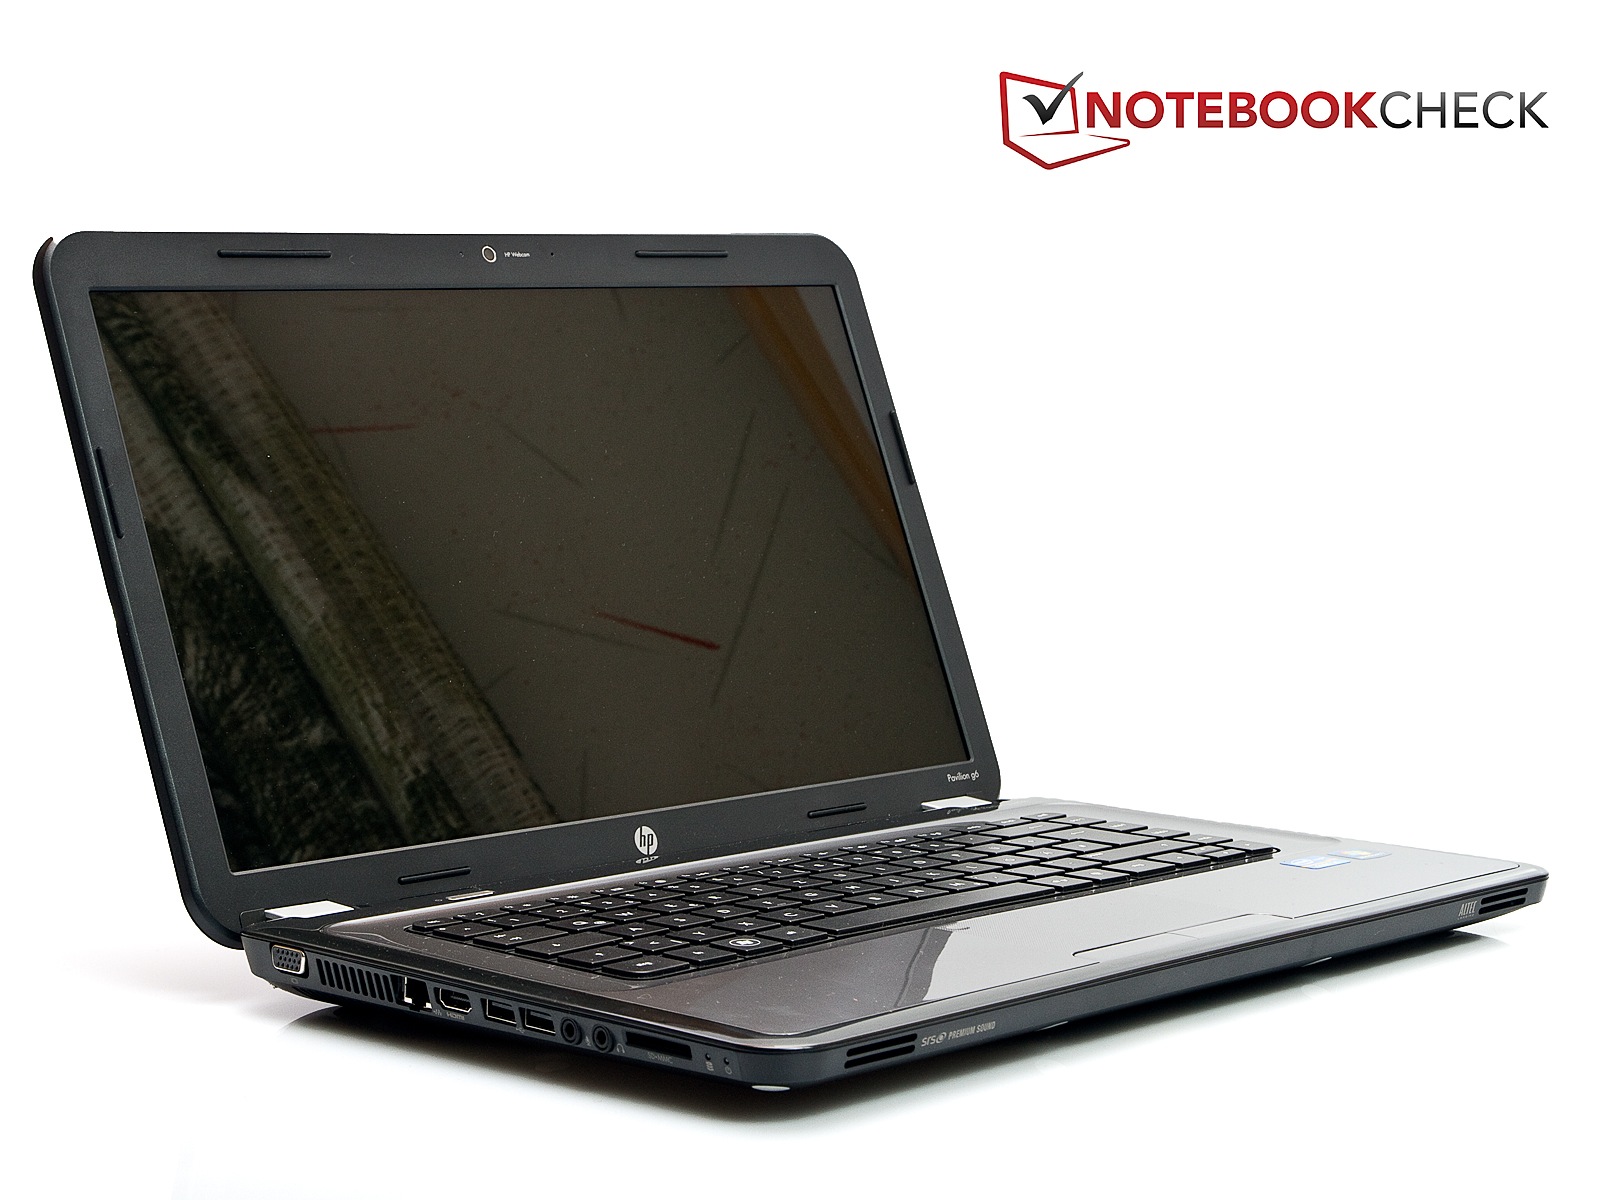 Review HP Pavilion g6-1141sg Notebook - NotebookCheck.net Reviews